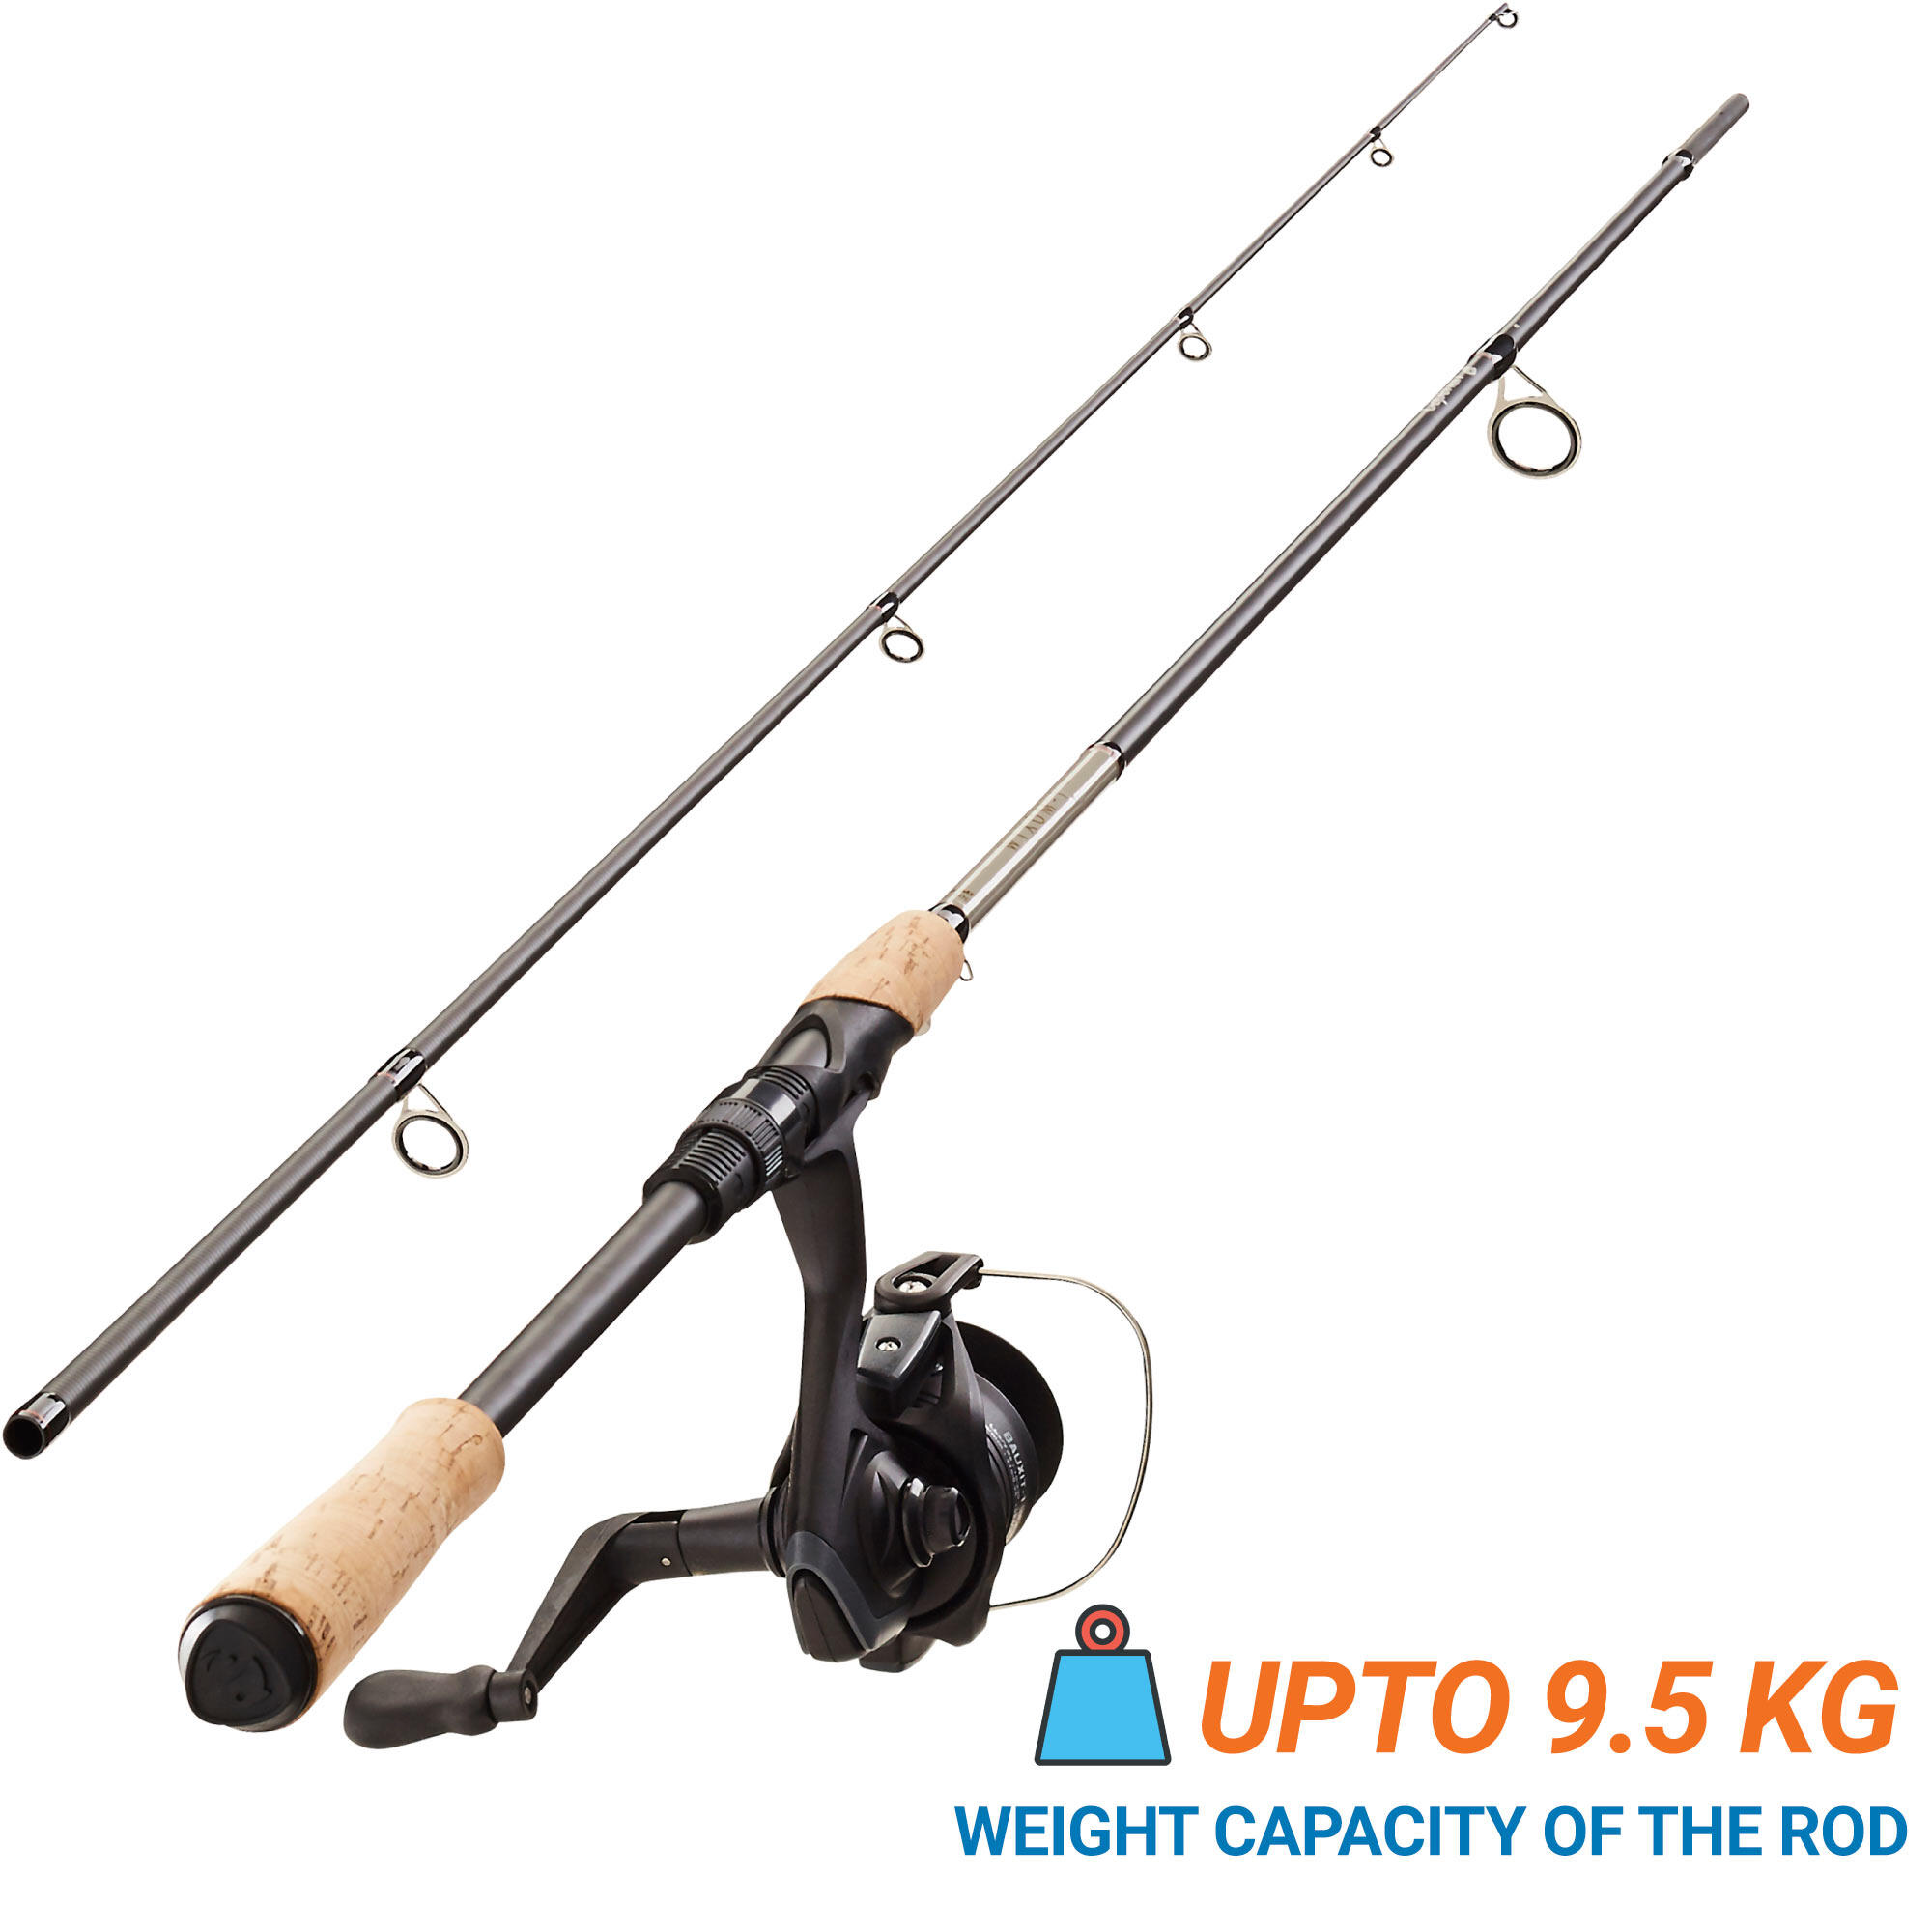 Buy best fishing products online at Decathlon.